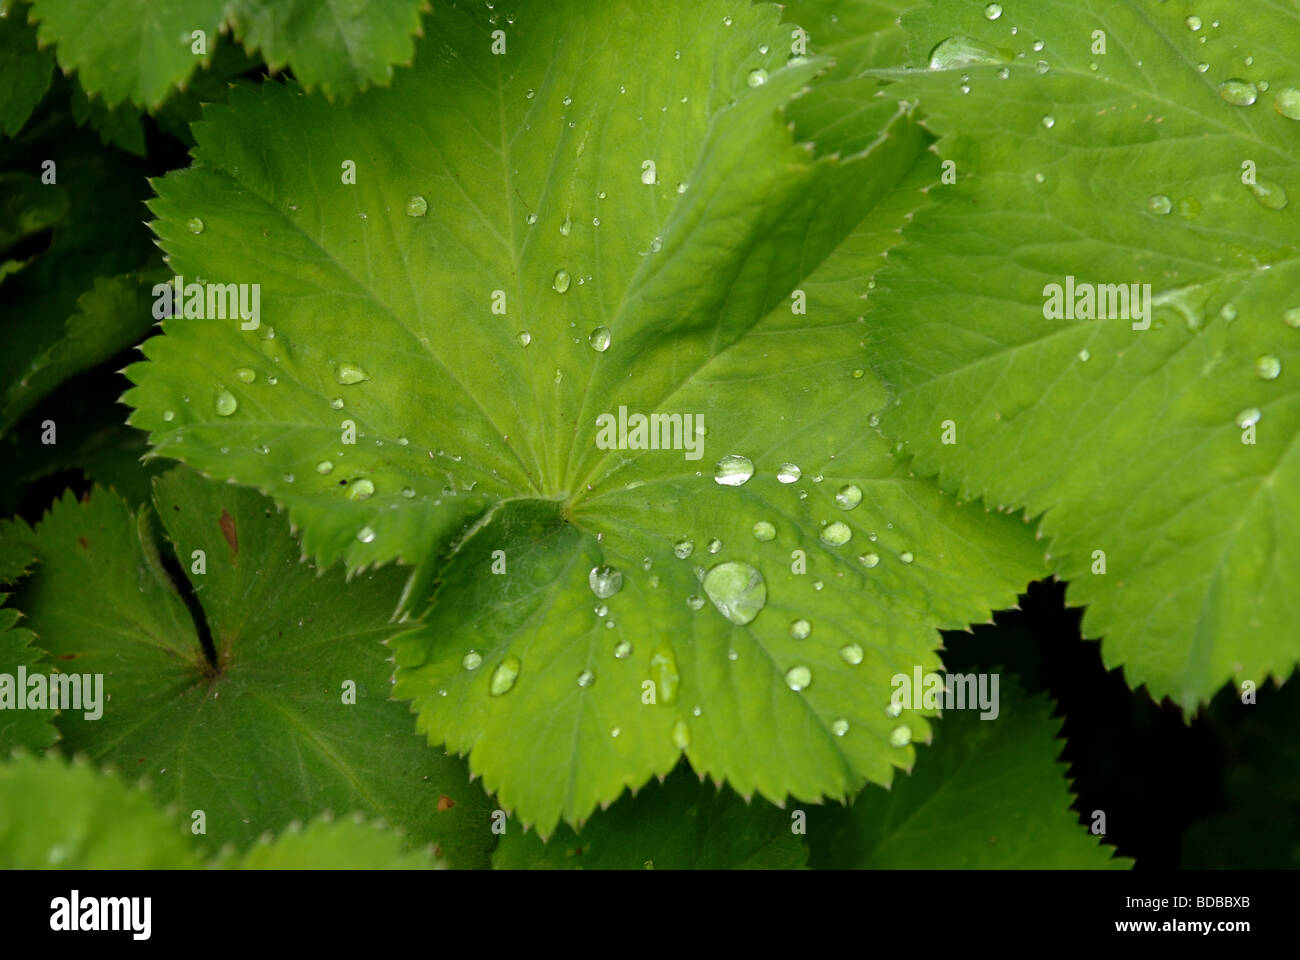 raindrops on some leaves of a garden Ladys Mantle or Alchemilla Mollis Stock Photo